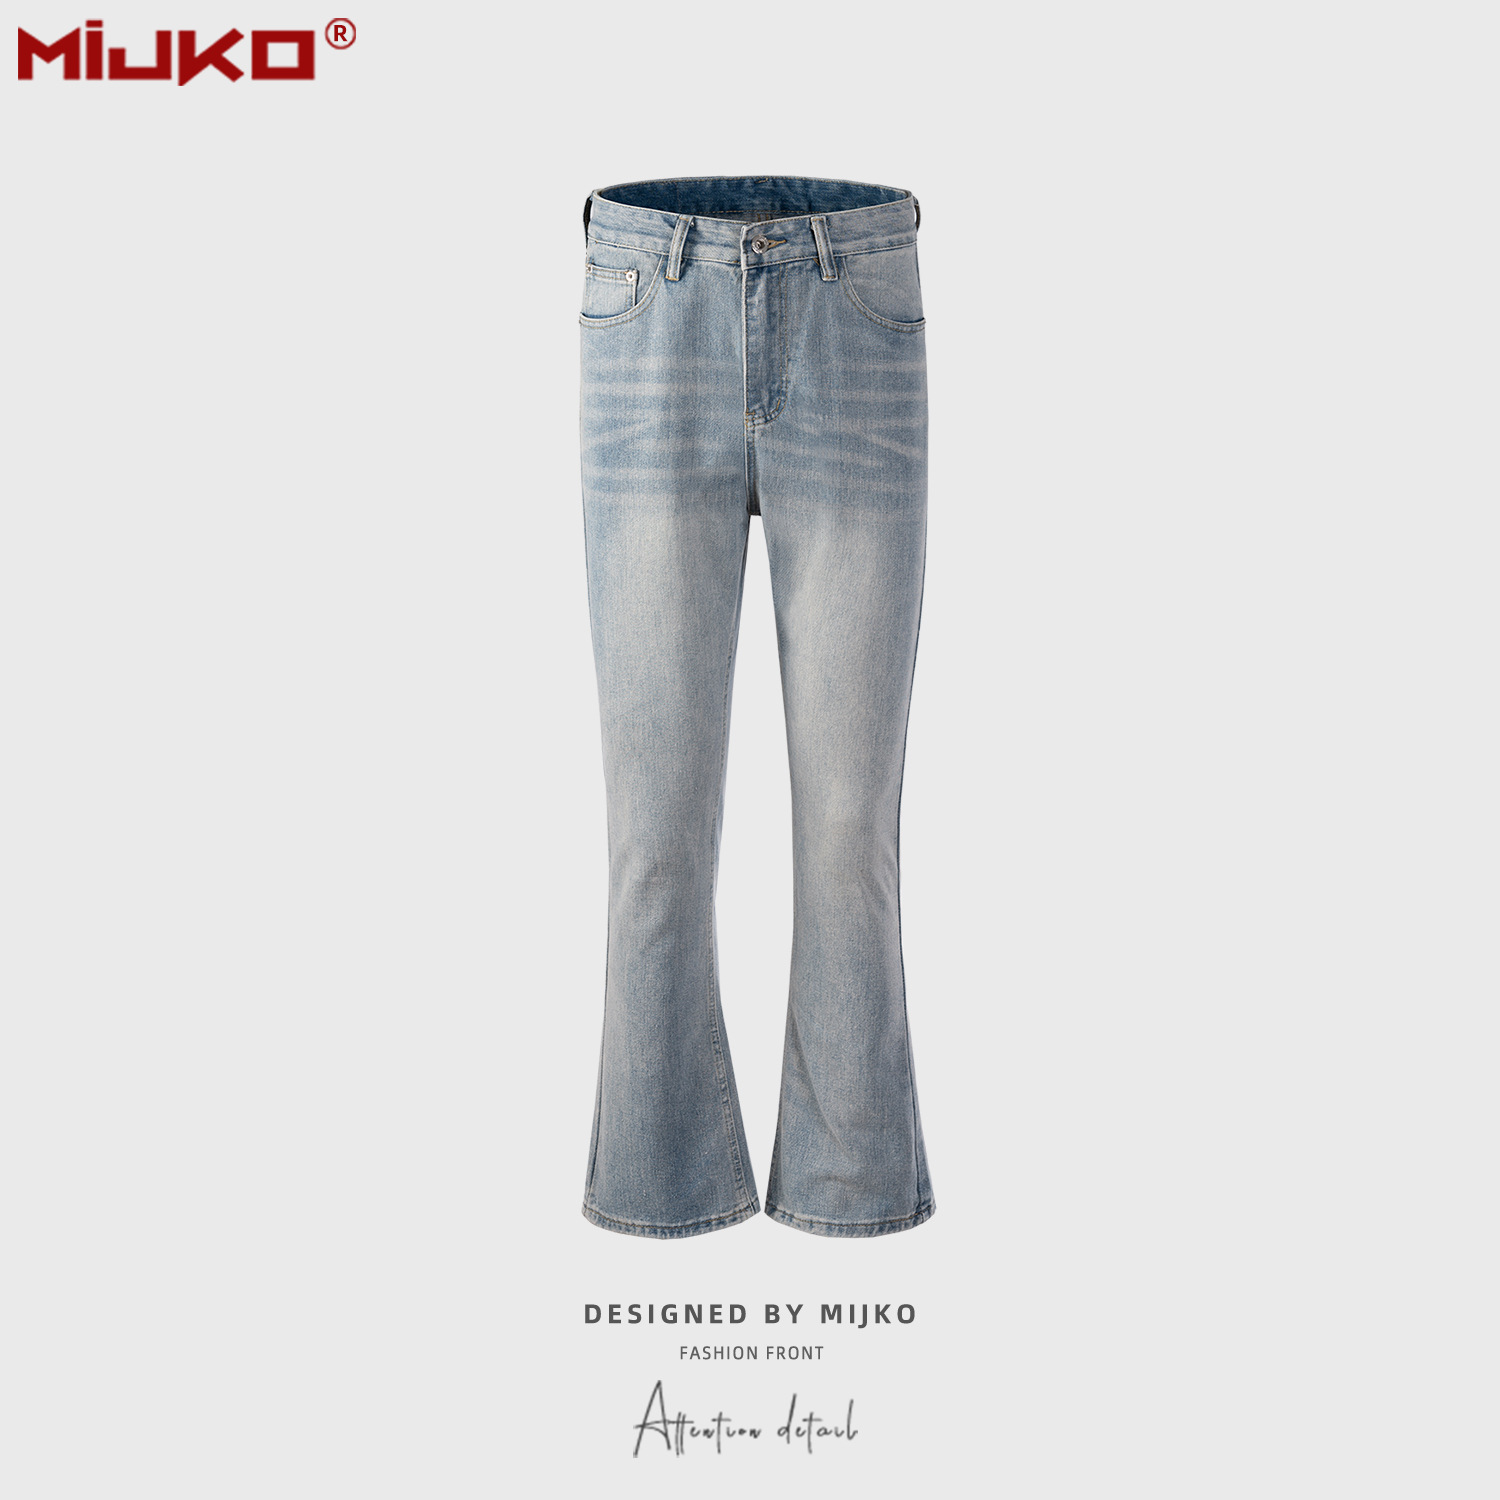 Mijko Women's Clothing Men's Urban Washed Distressed Trousers Men's and Women's Same Two-Color Slightly Brushed White High Street Fashion Jeans